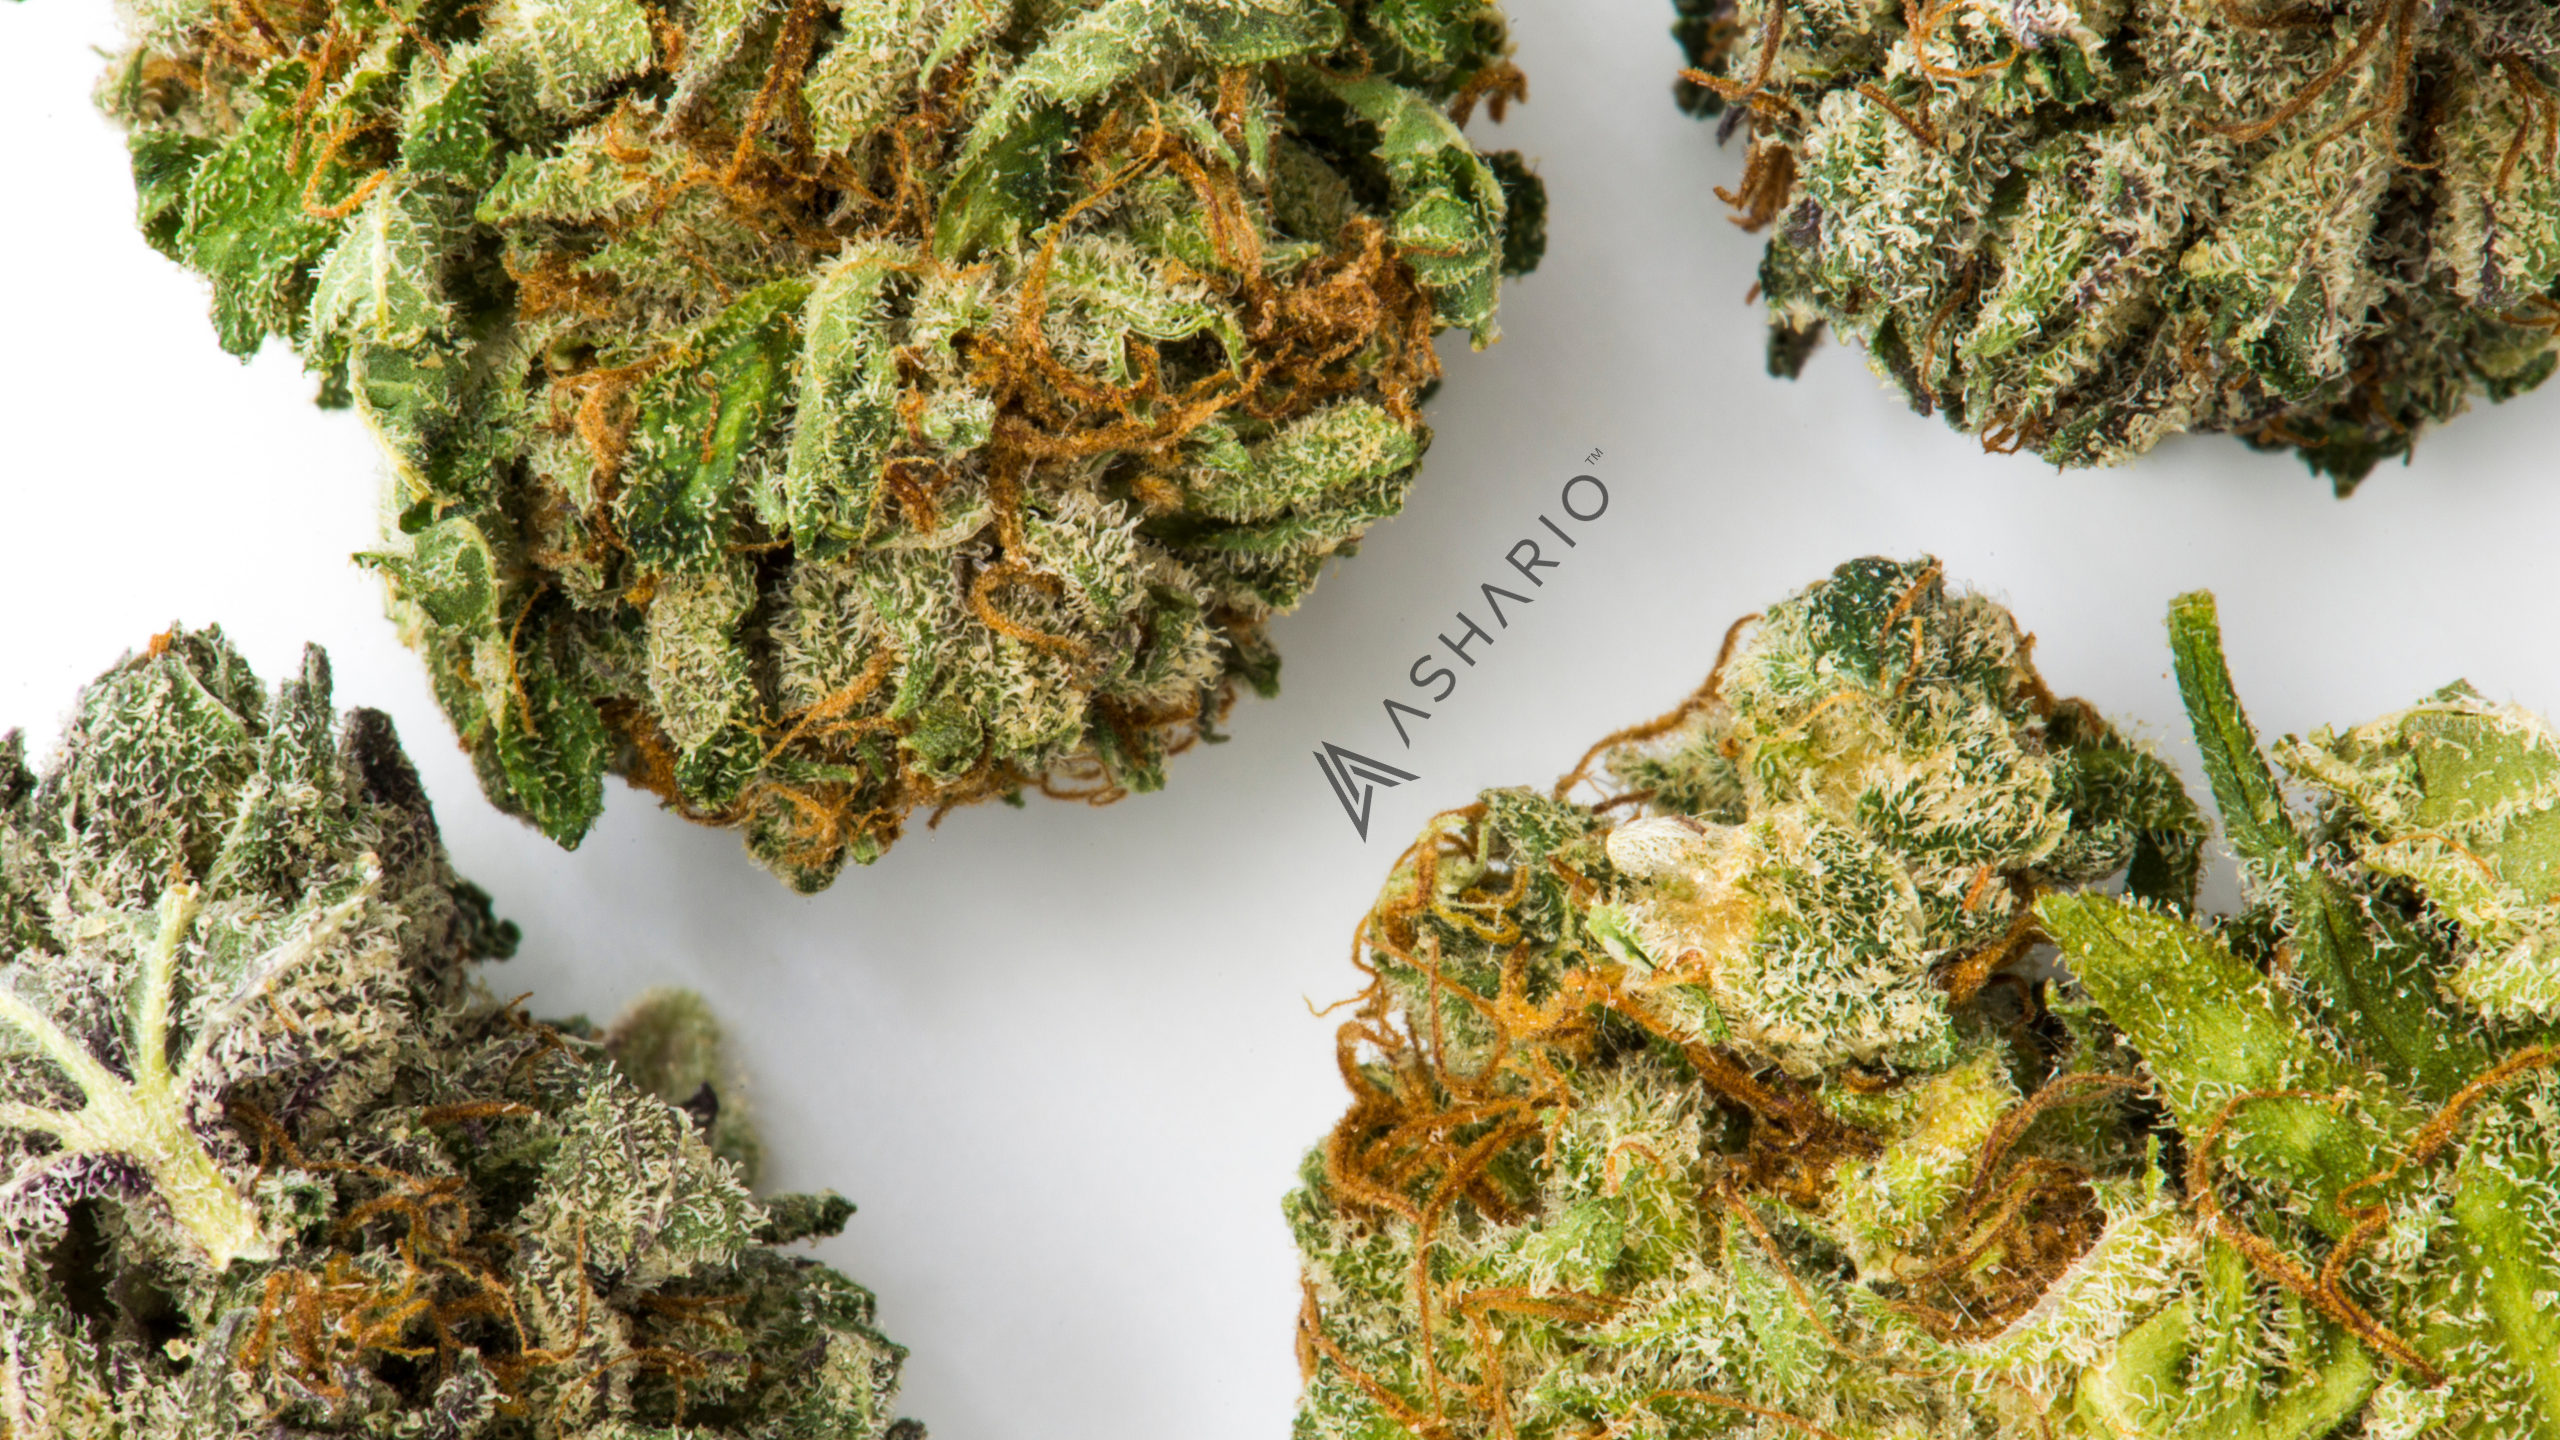 Ashario Cannabis stands out among dispensaries in North York for its diverse selection of strains. 